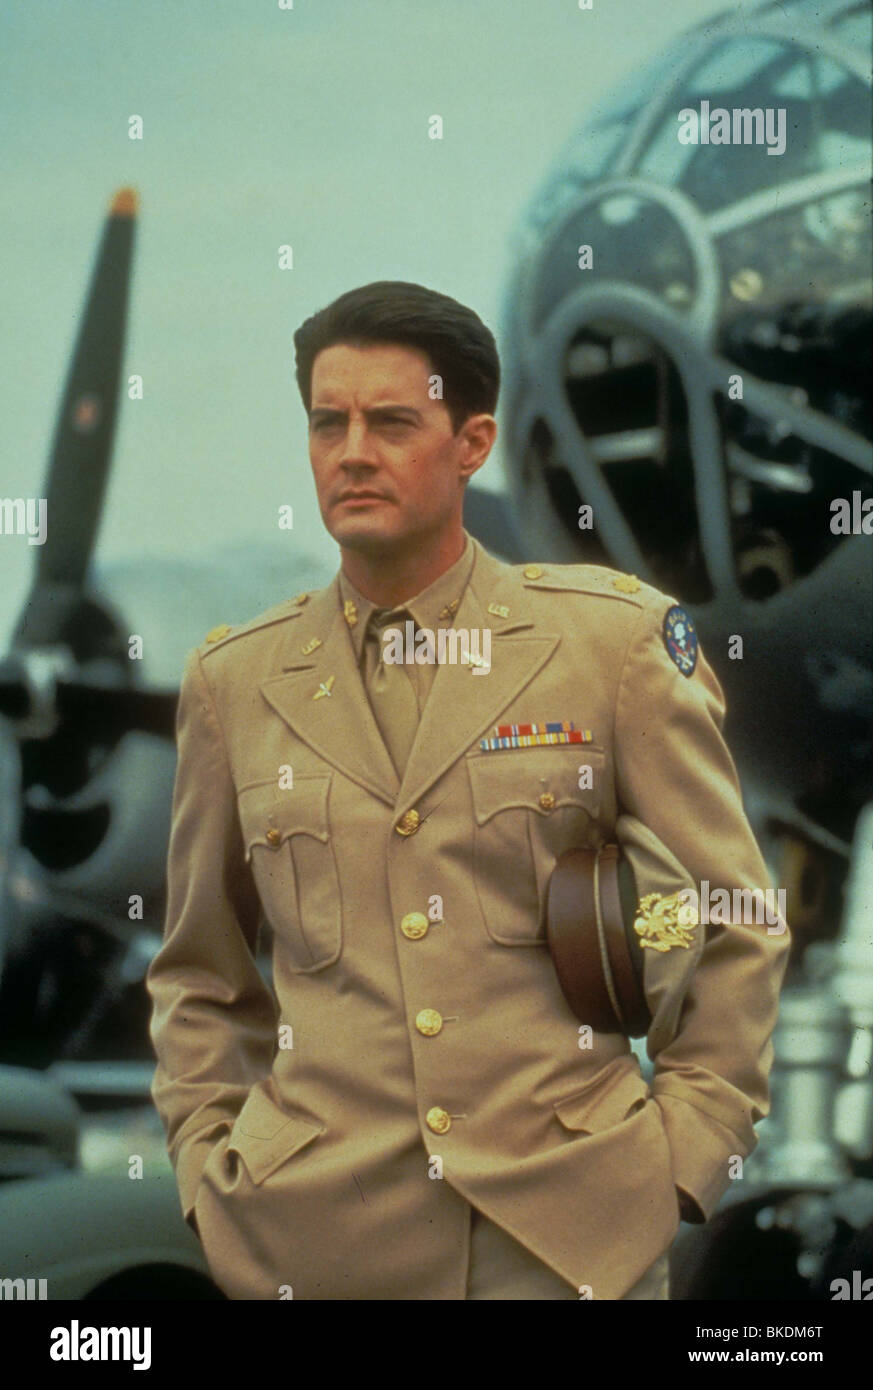 ROSWELL (1994) KYLE MACLACHLAN ROSW 004 CREDIT VIACOM Stockfoto